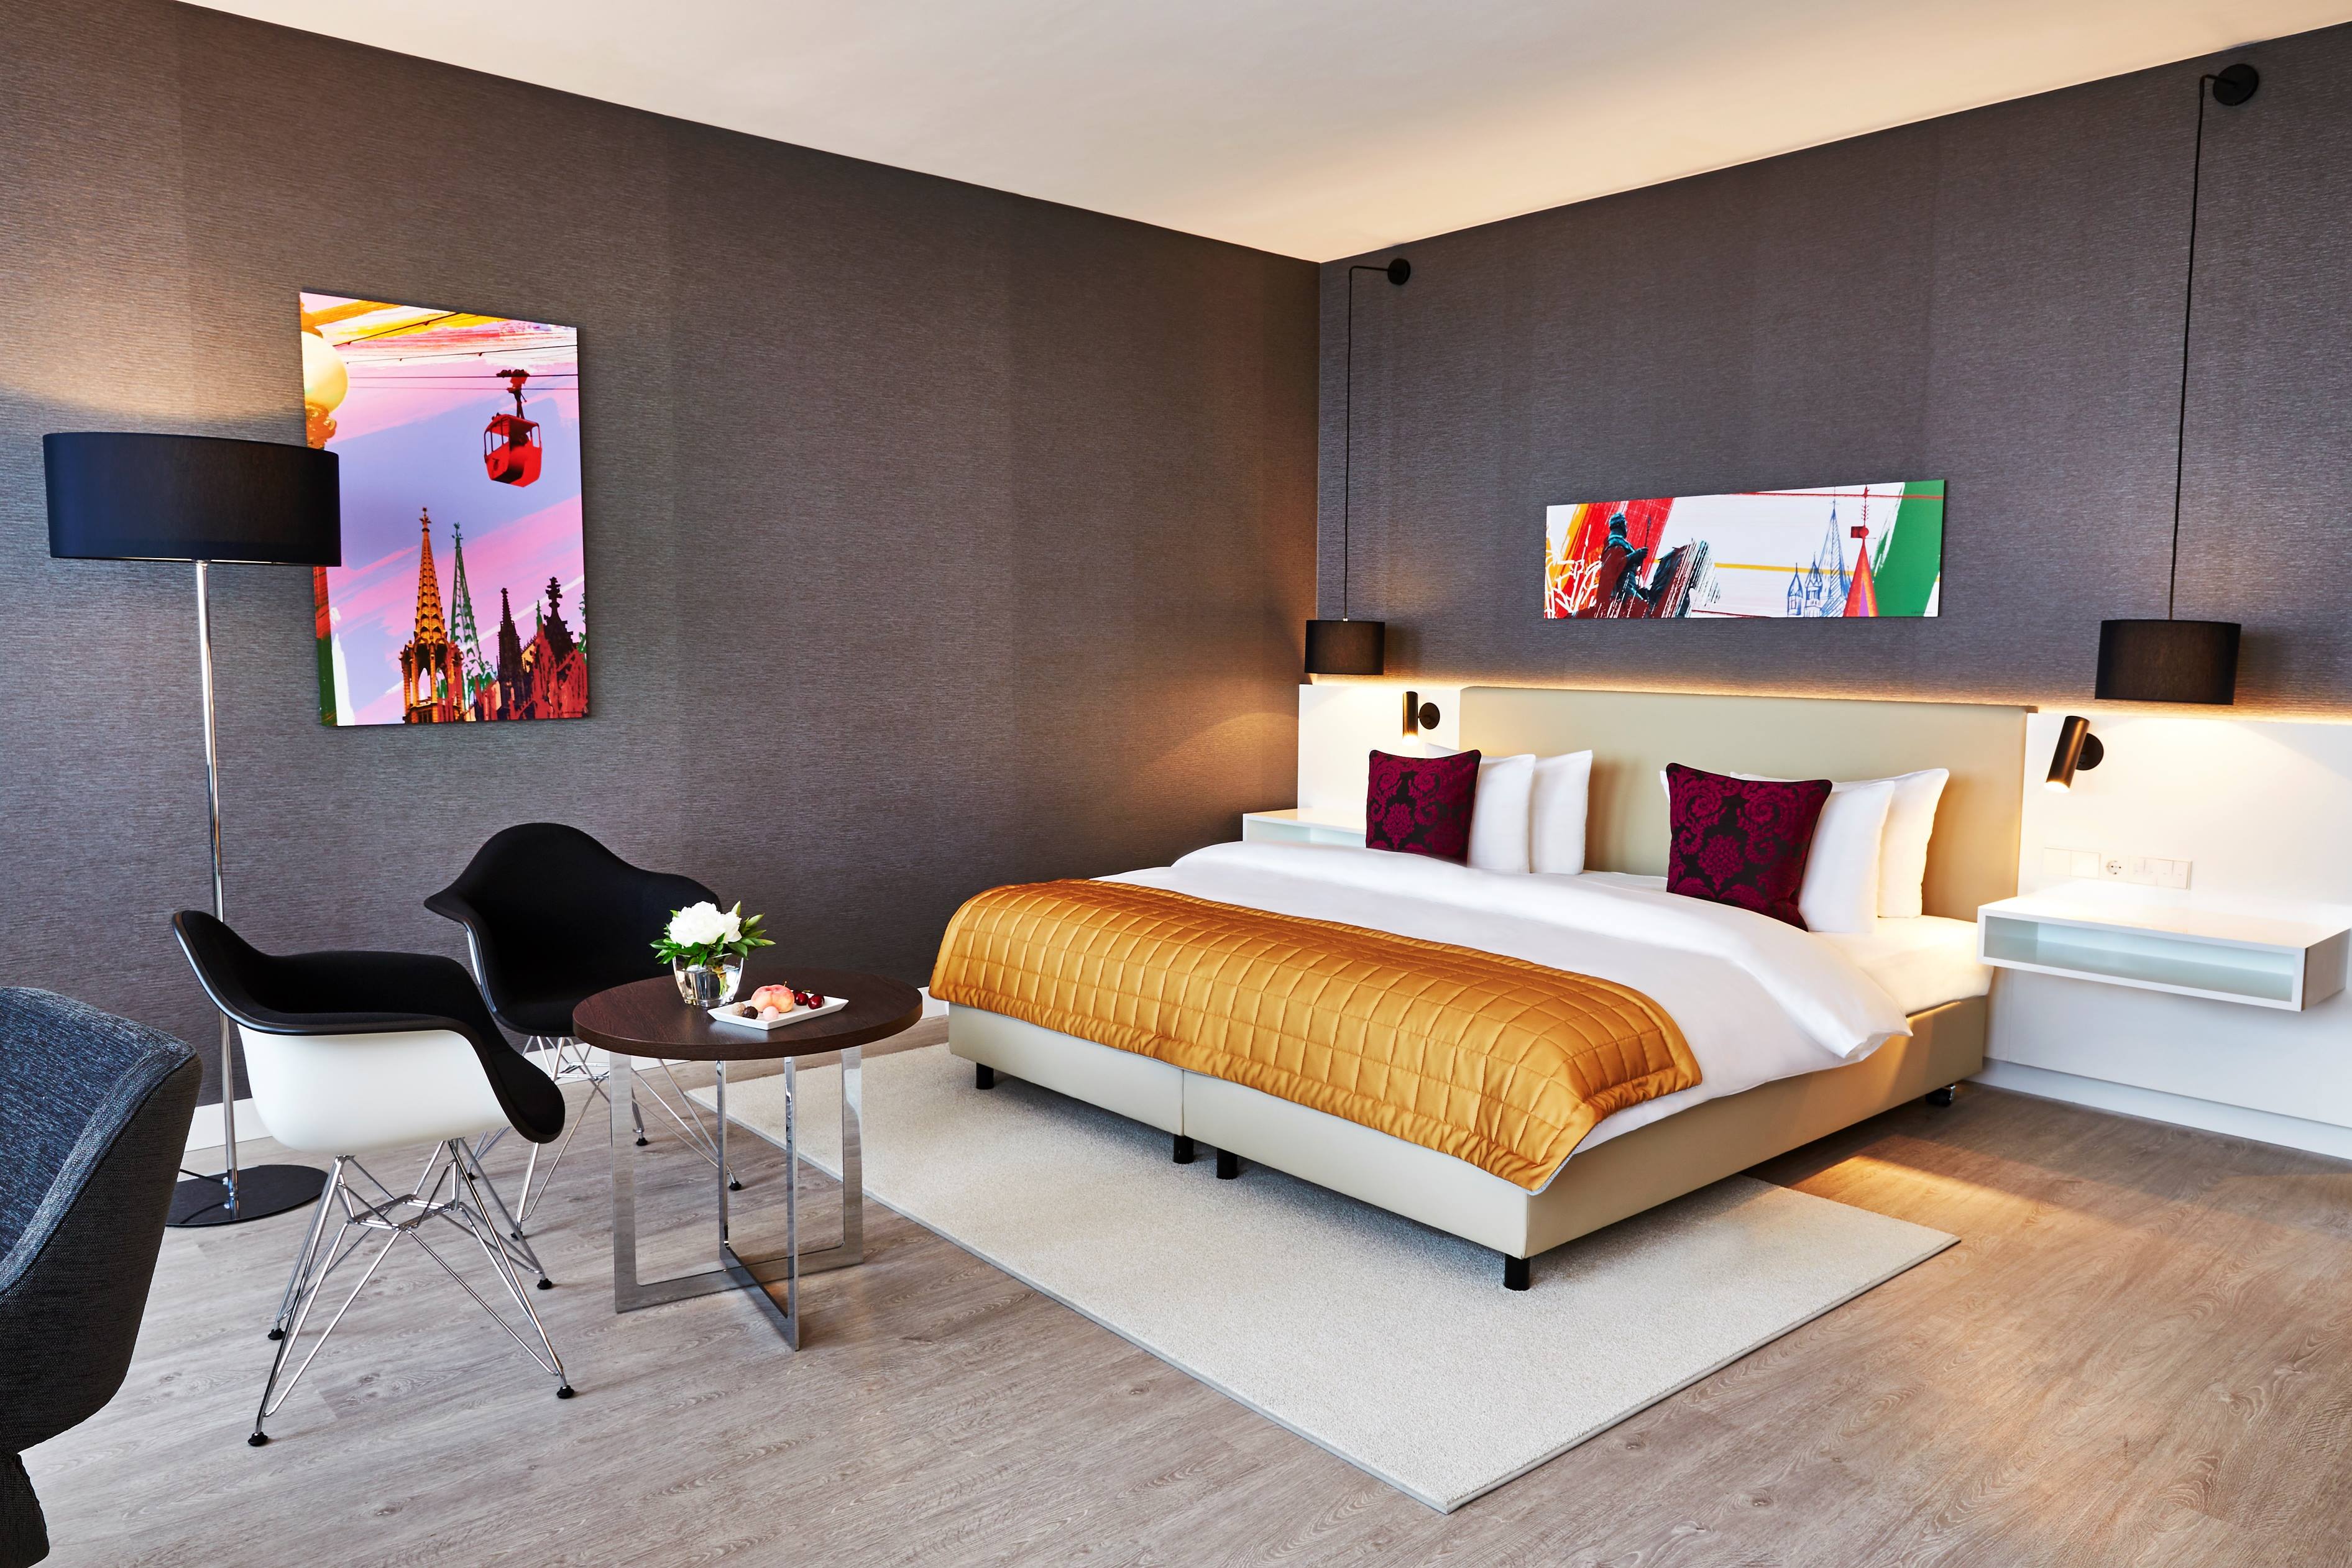 The Steigenberger Hotel Cologne opens its doors following 23 million euro renovation works